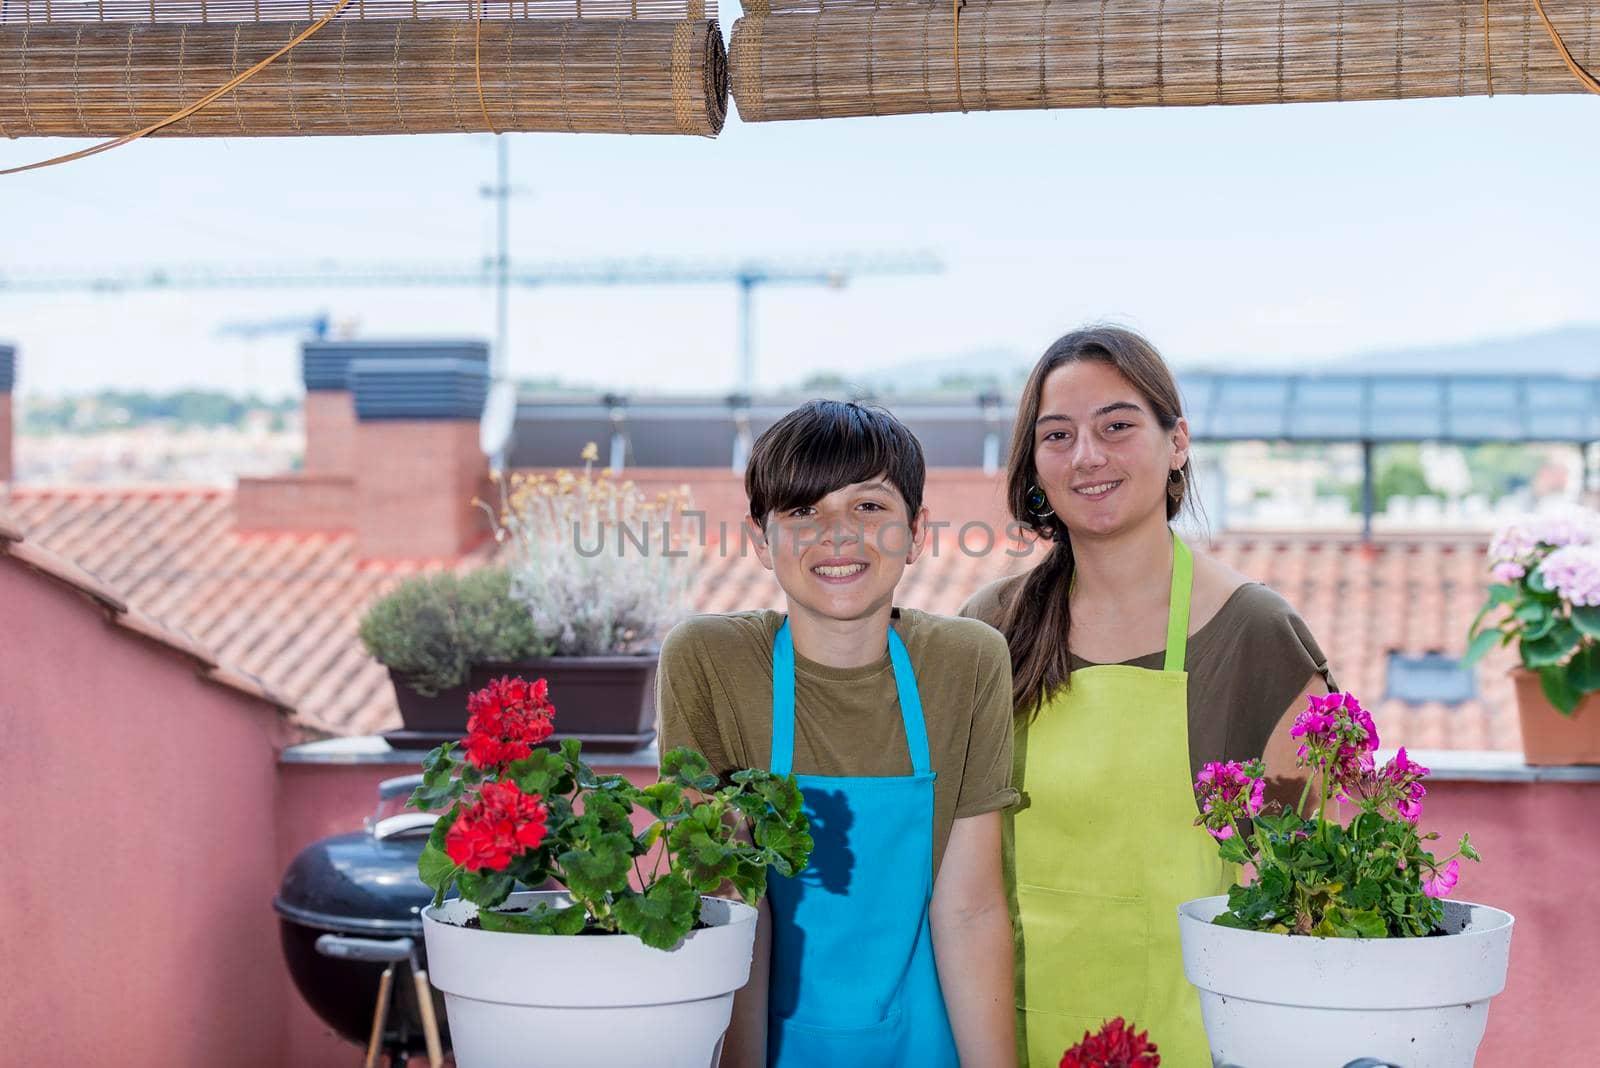 Two teenage holding plants while smiling on the terrace by raferto1973